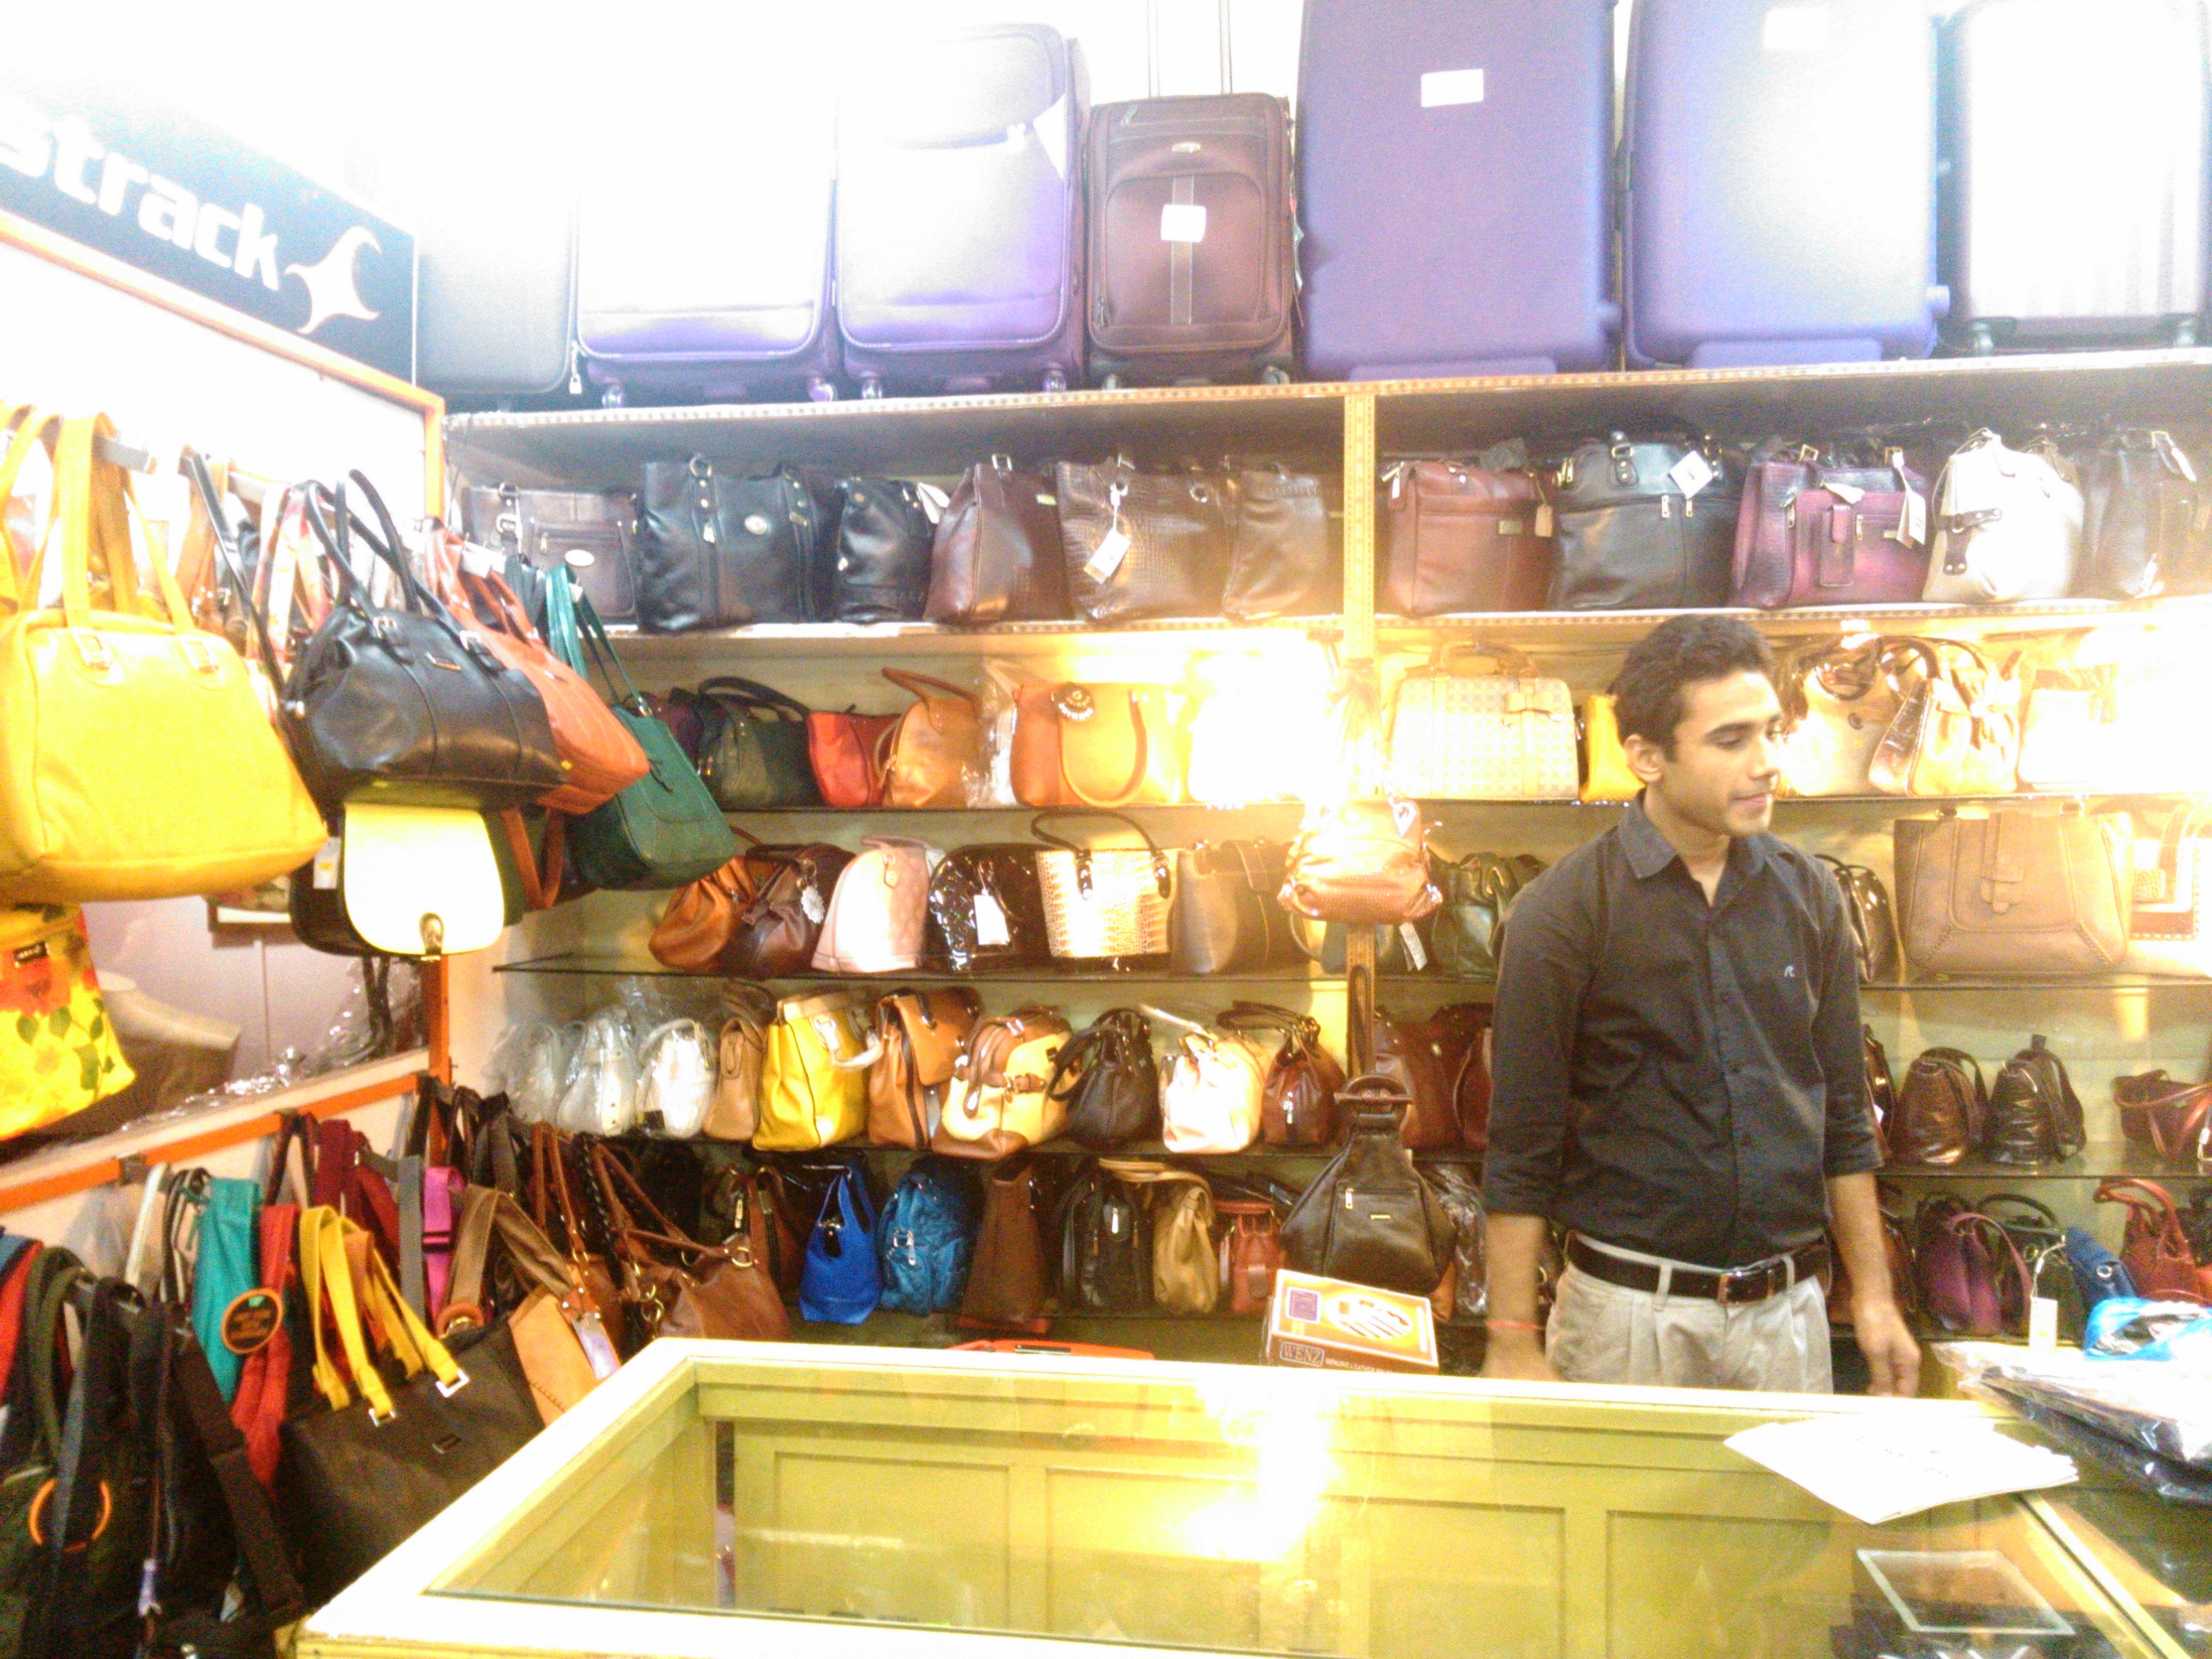 Awesome bag shop in Connaught Place, New Delhi